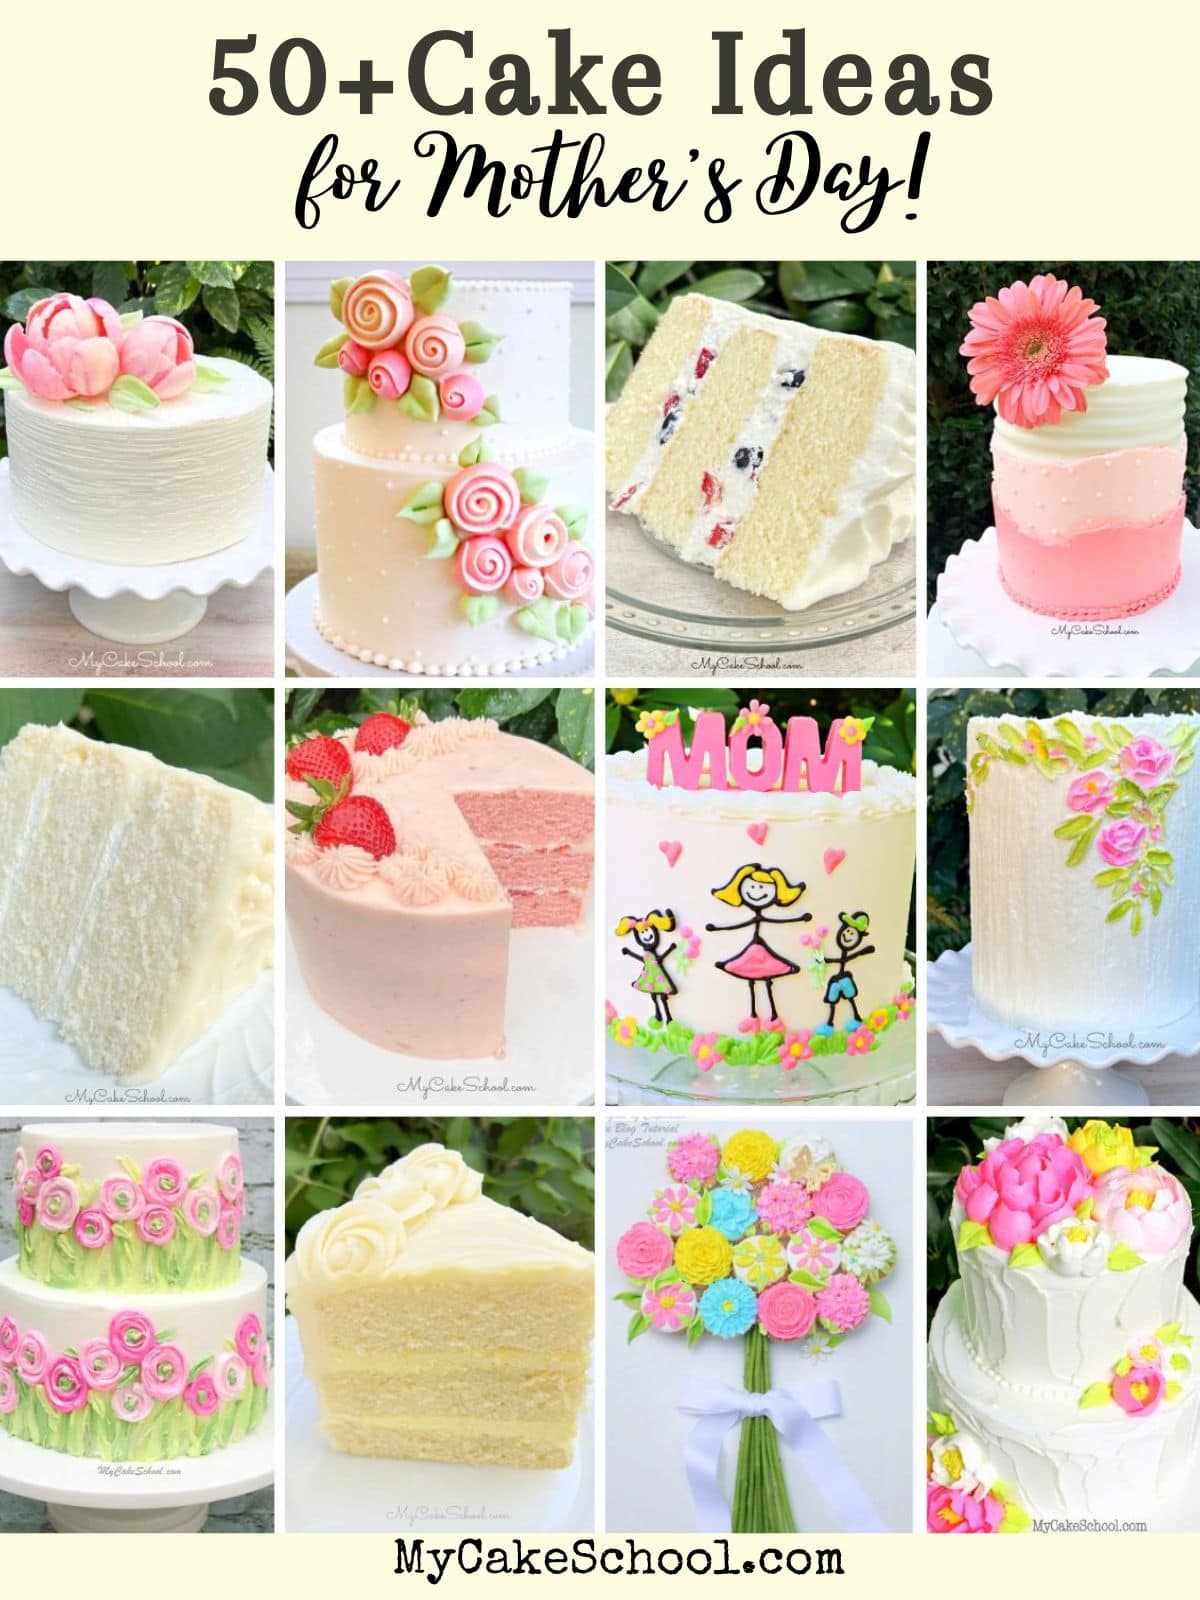 50+ Mother's Day Cakes - My Cake School